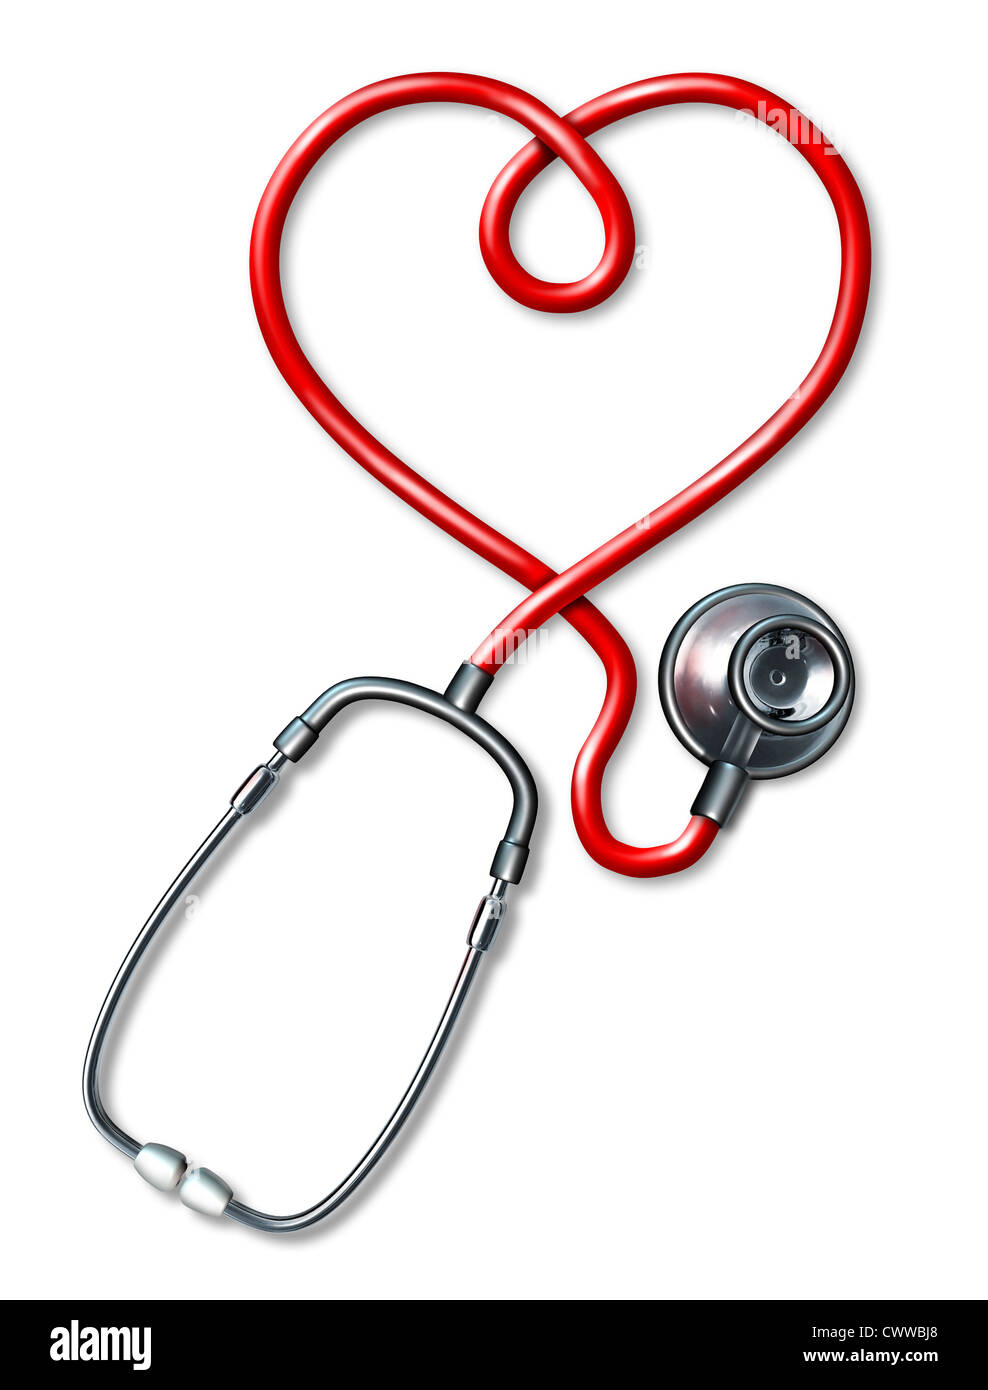 Peddling Surrounded Try Stethoscope heart symbol represented bu a medical acoustic instrument with  the cord in the shape of a red heart representing health and fitness in the  world of medicine Stock Photo - Alamy